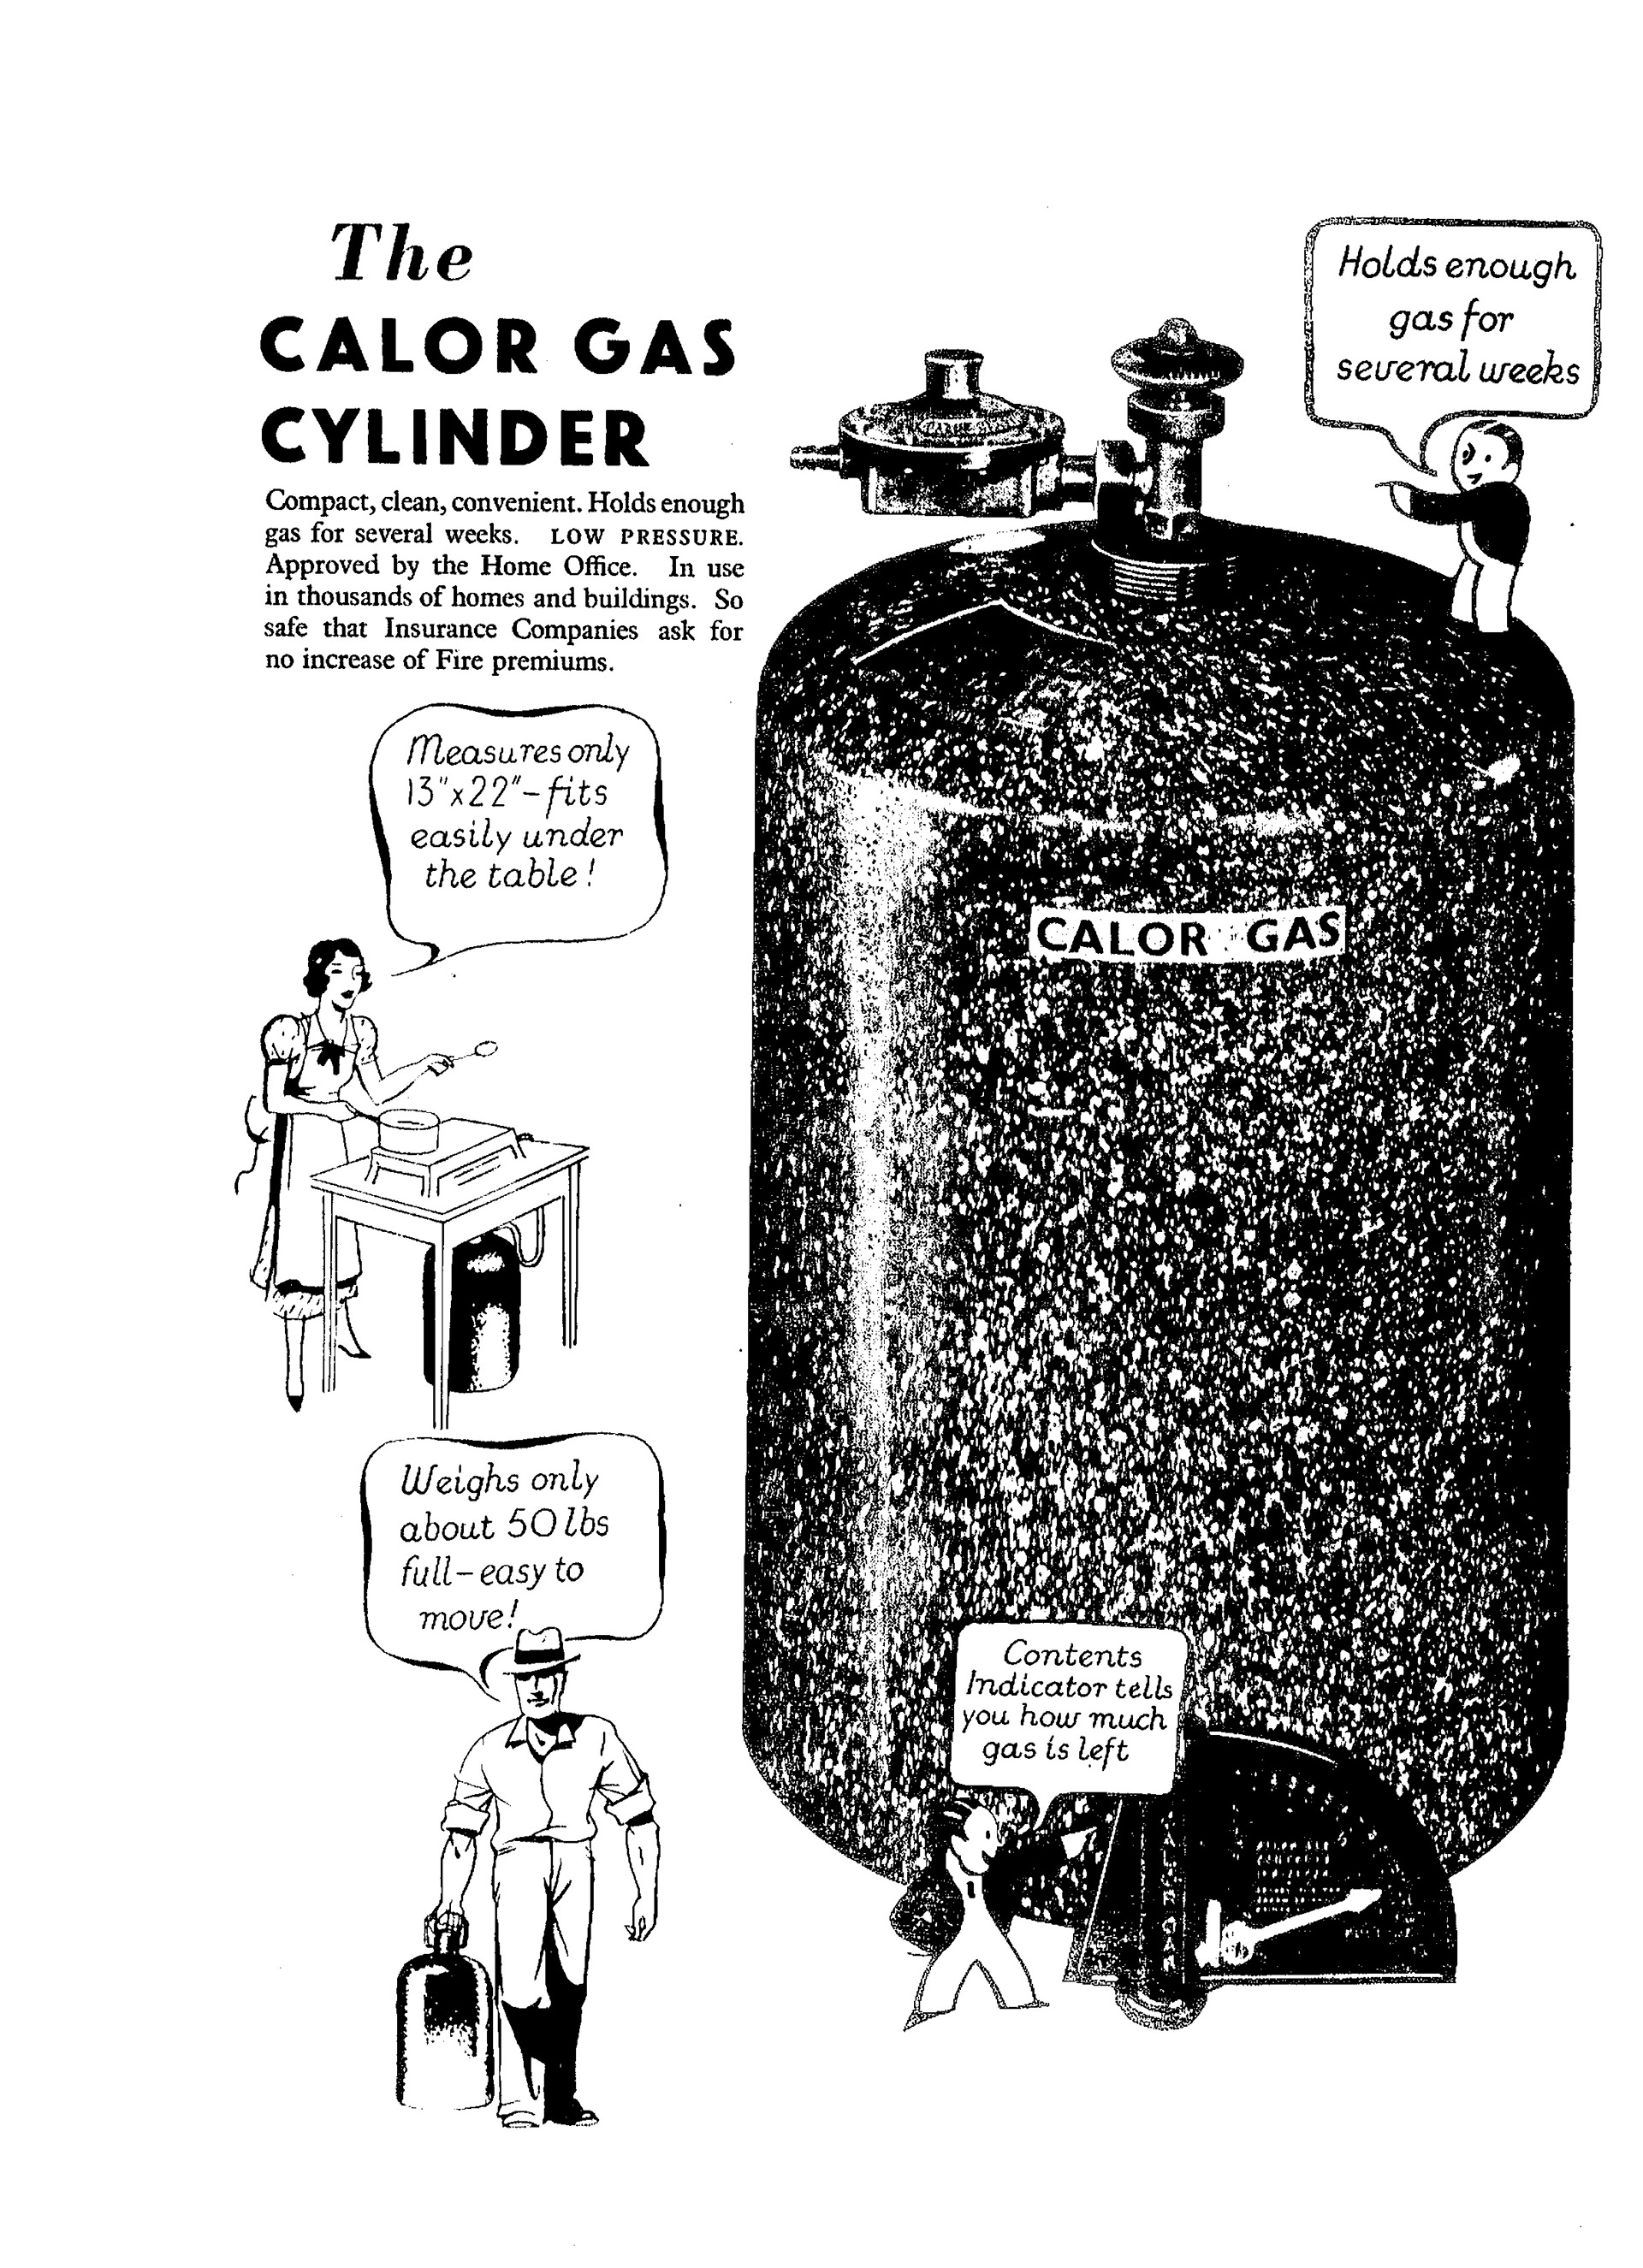 Black and white advertisement: 'The Calor Gas Cylinder' 